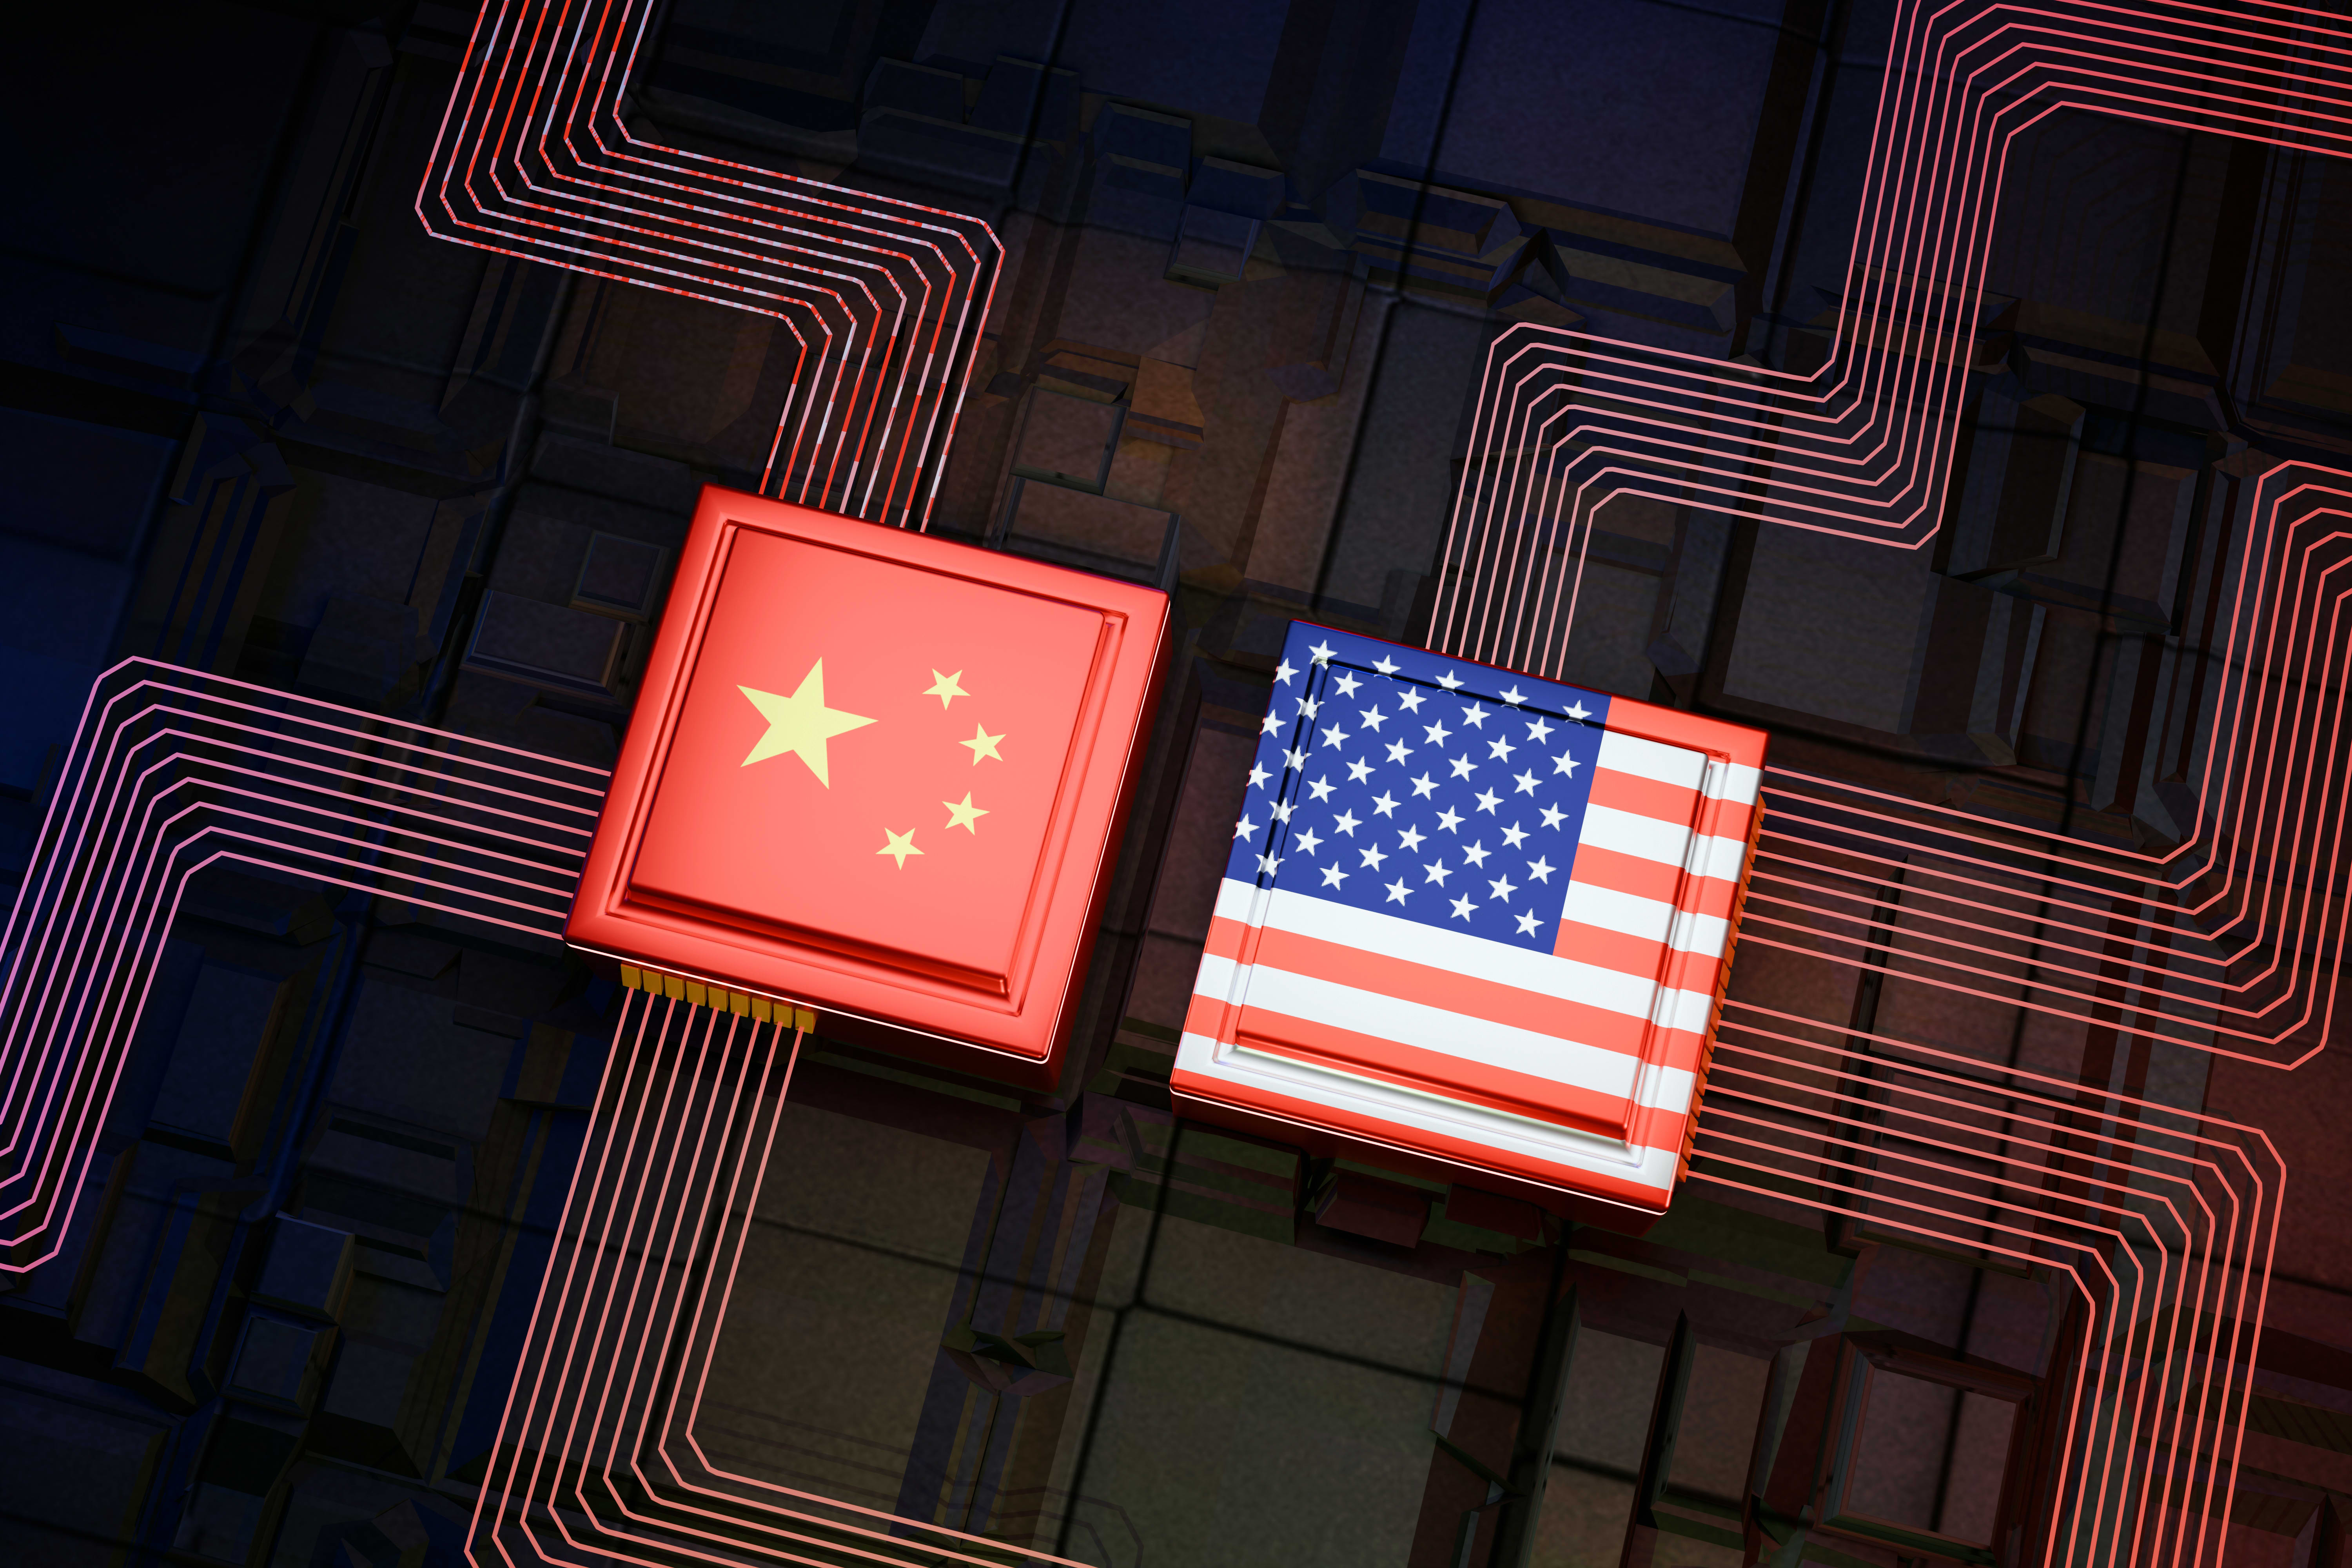 China remains an important market for US chipmakers amid rising tensions